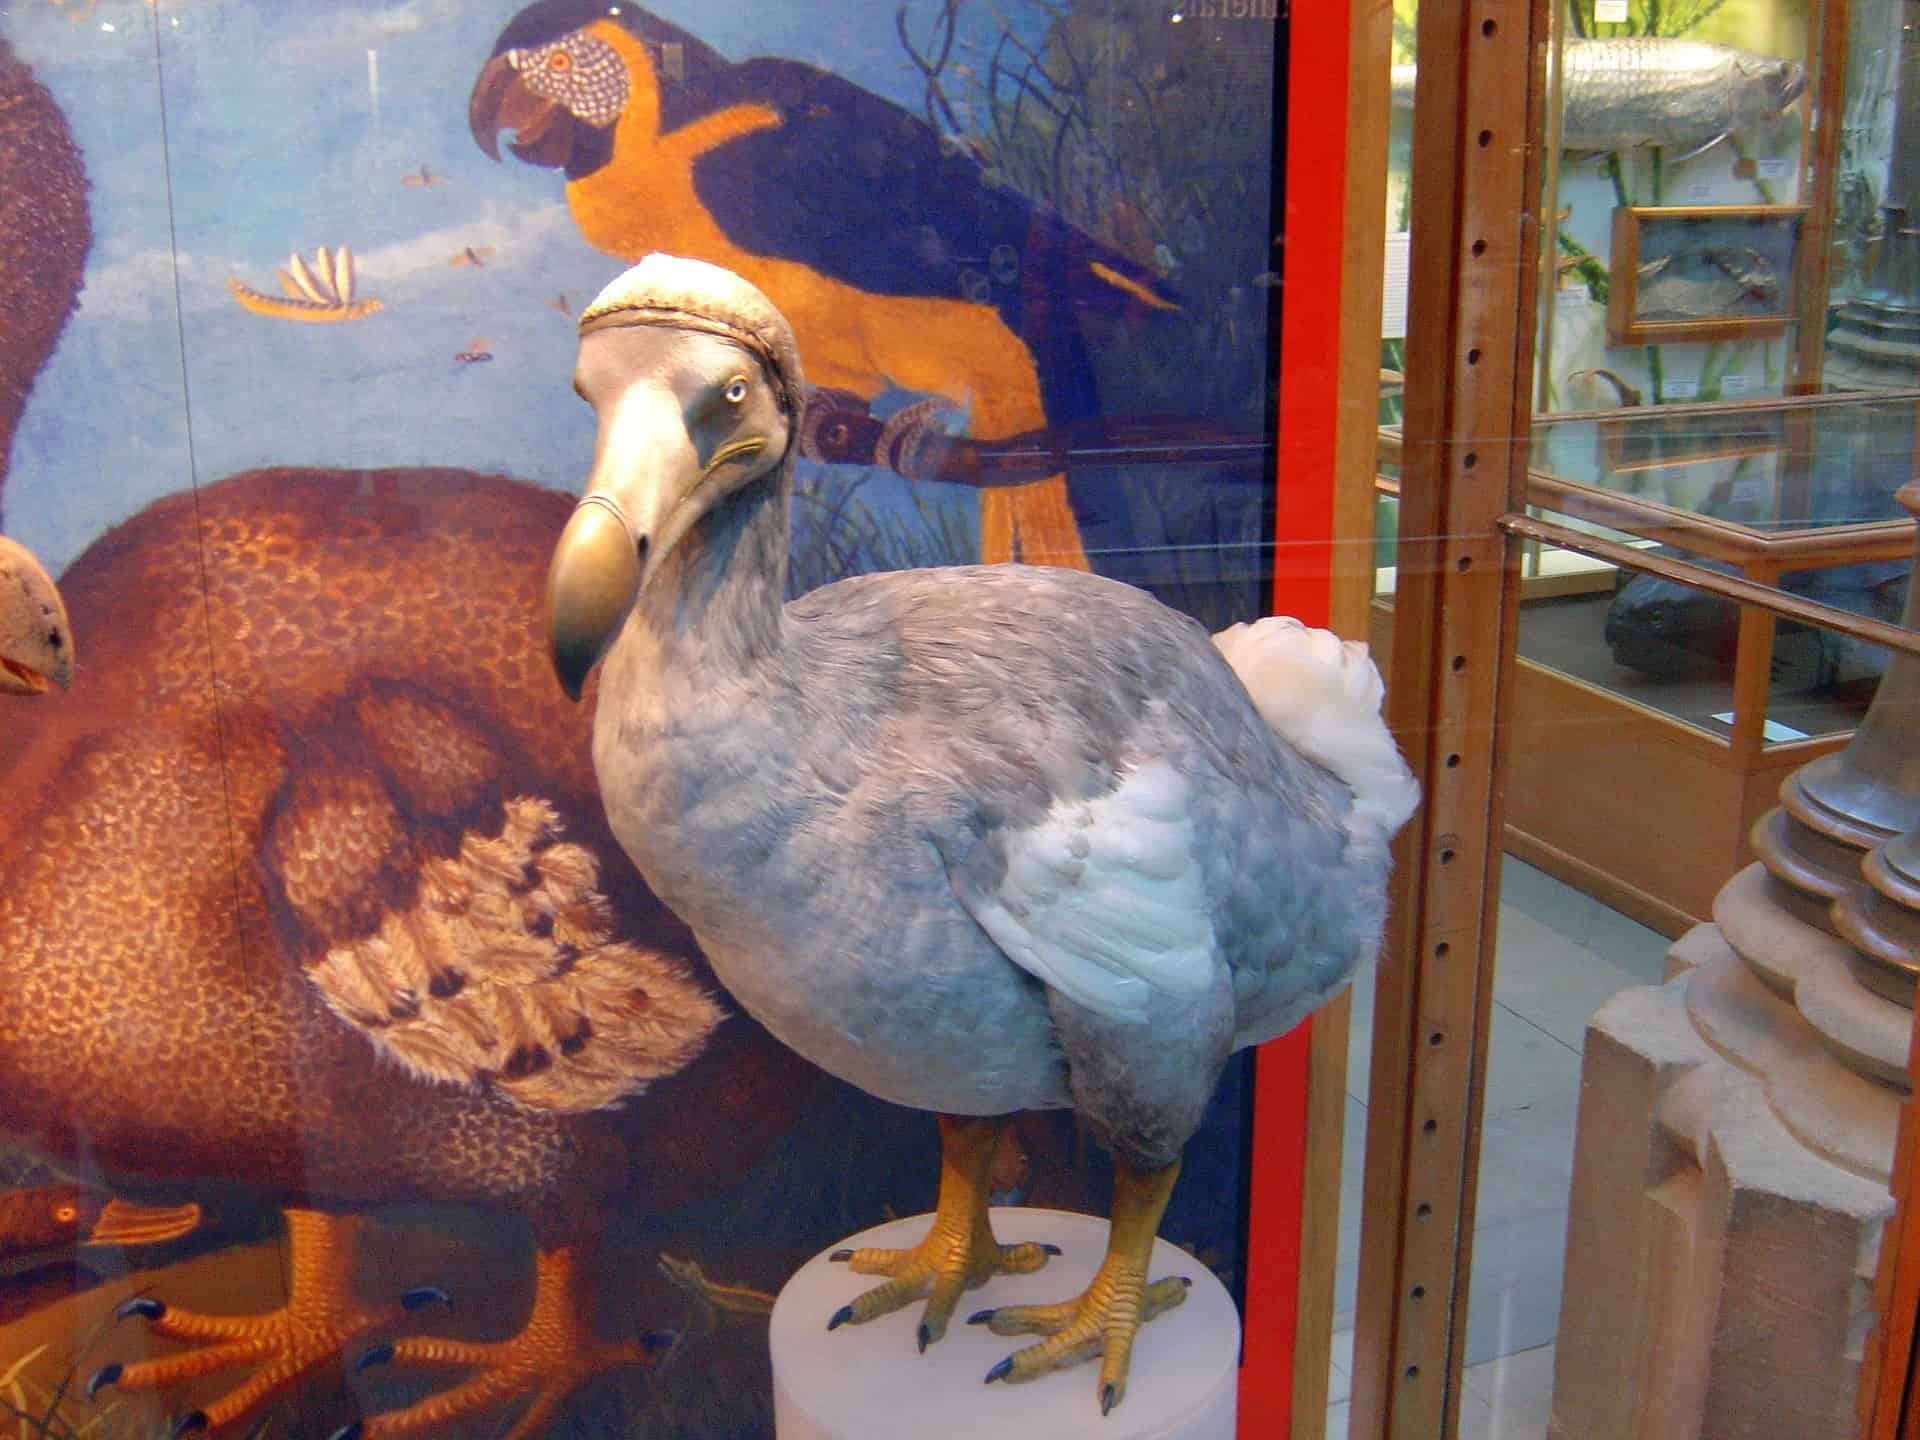 Facts About the Dodo Bird